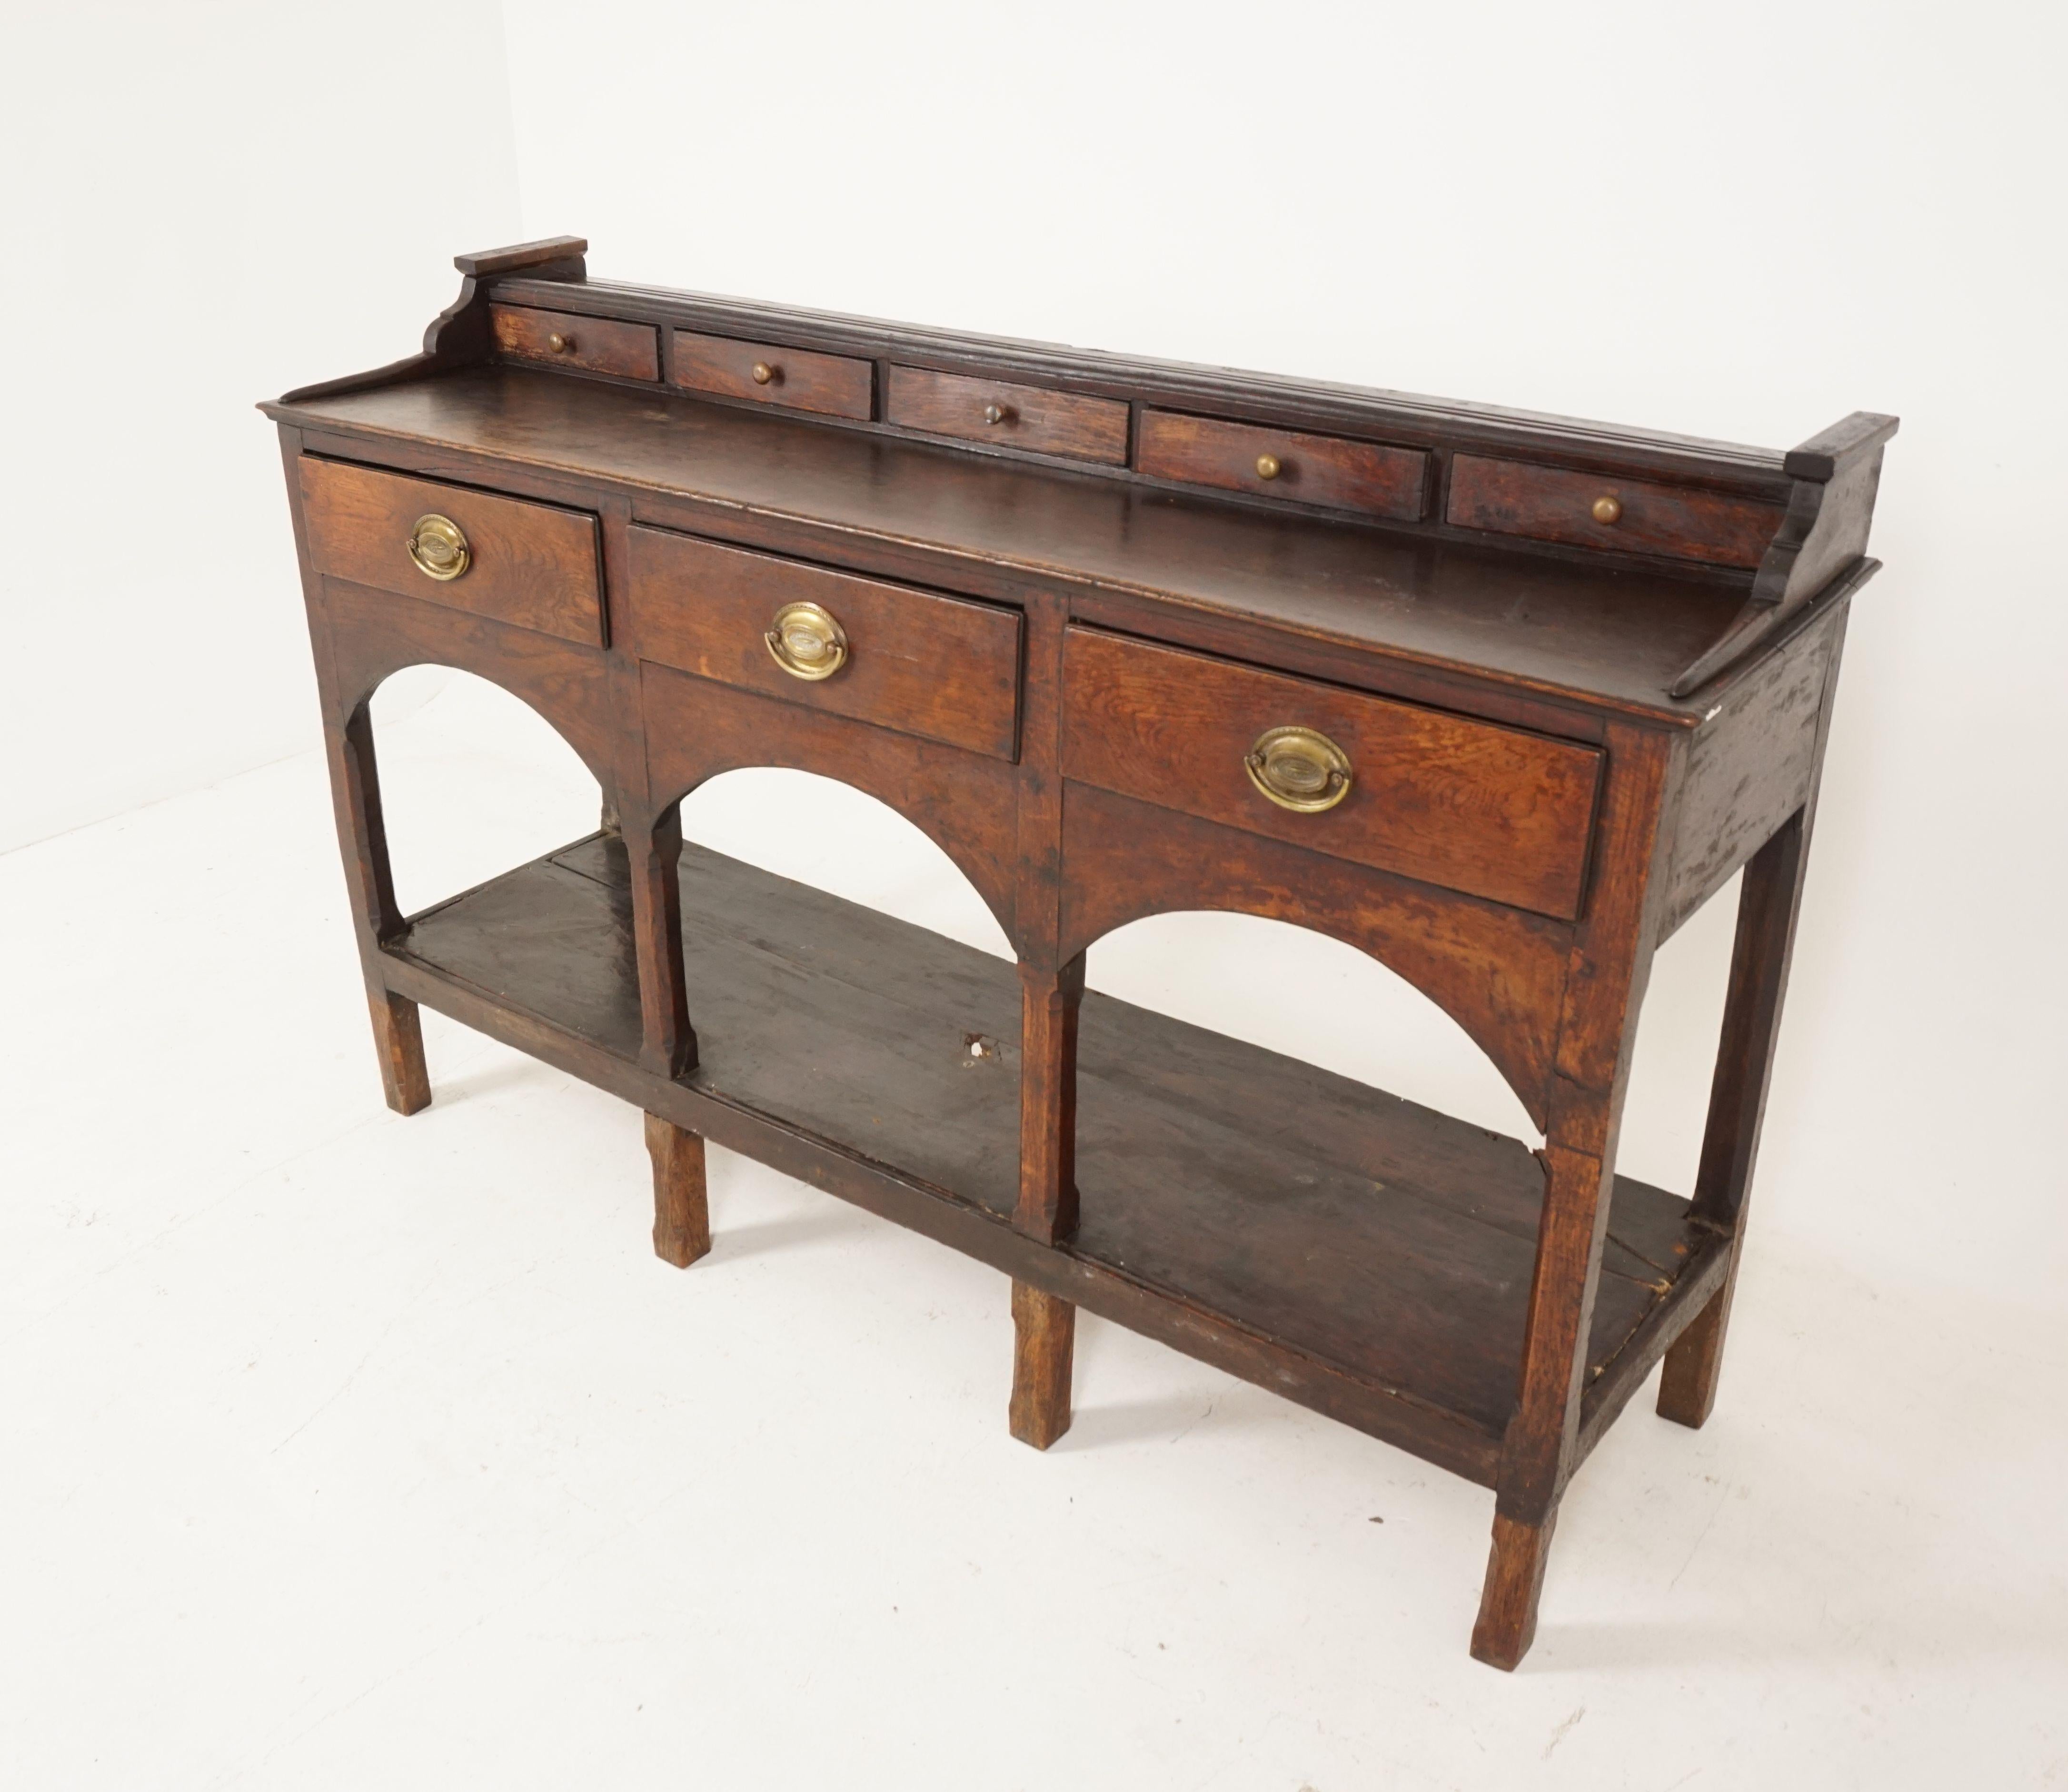 Antique welsh oak pot board dresser base, sideboard, wales 1760, B2060

Wales 1760
Original finish
Single plank top
Applied bead plate stand
Five spice drawers below
With replacement hardware over three dovetailed drawers
With replacement